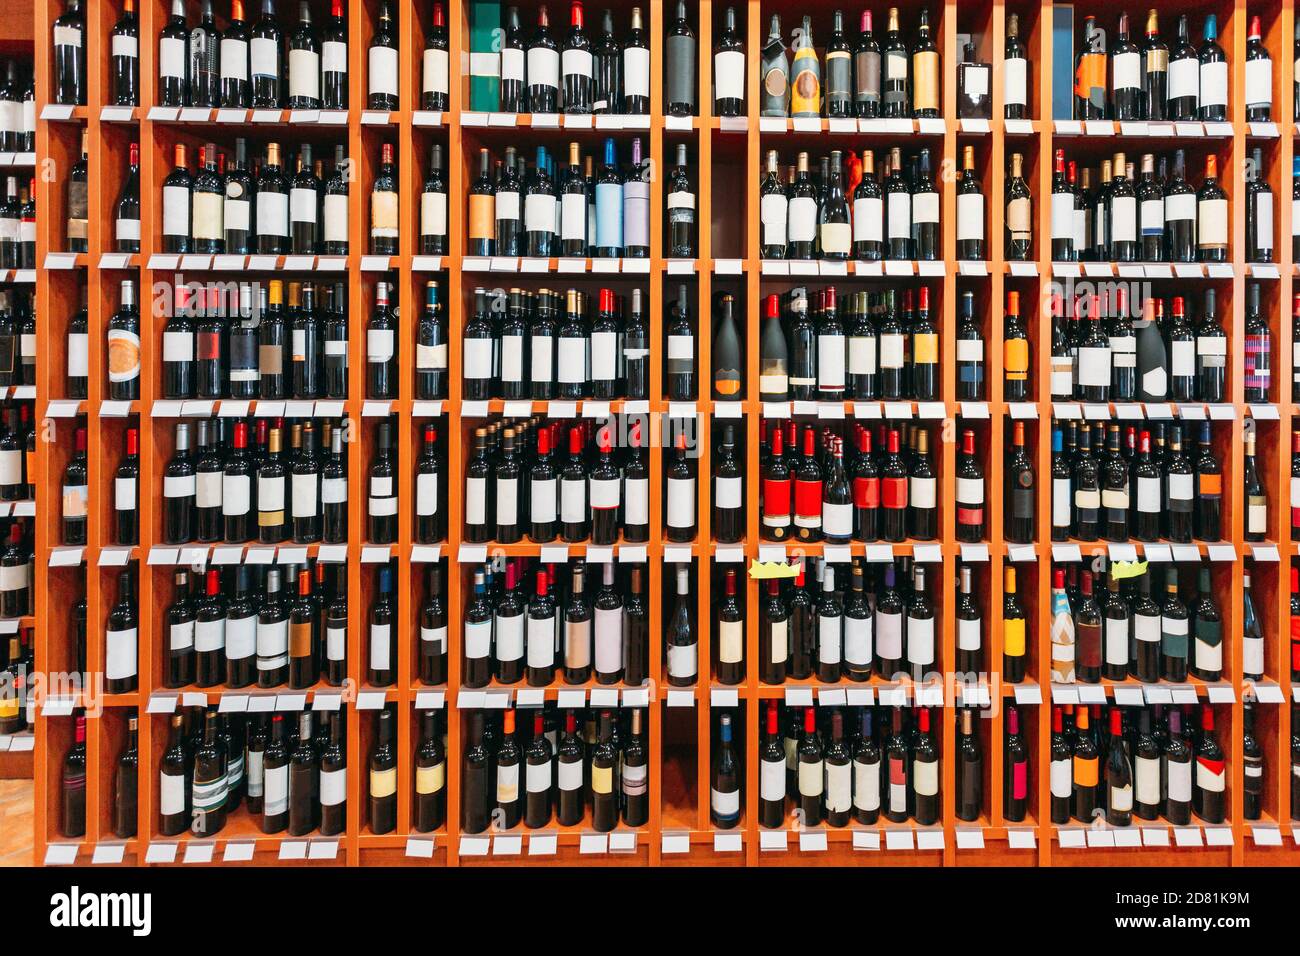 Showcase With Wine Bottles At The Wine Store. Wall With Alcoholic Drinks Wine Bottles On Shelves Stock Photo